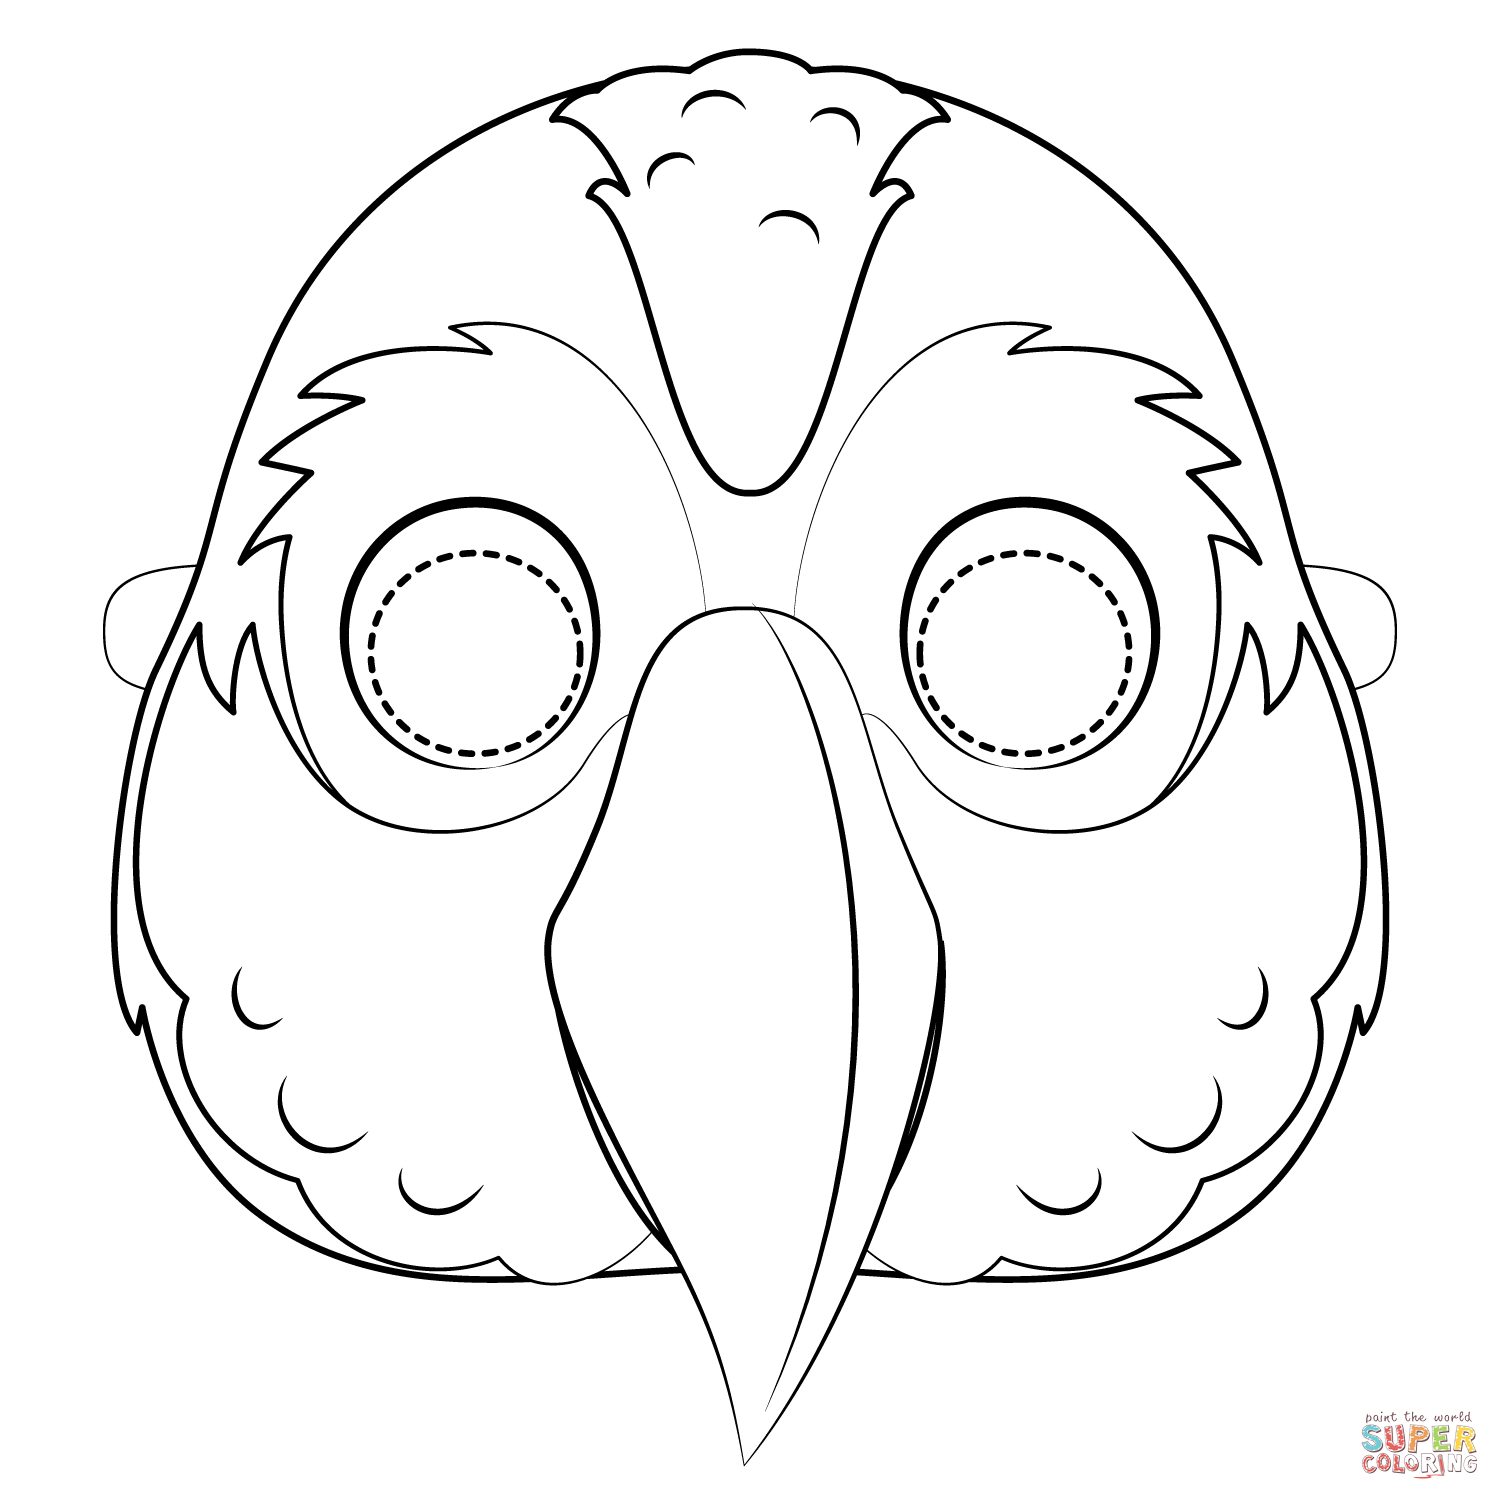 Parrot Mask coloring page | Free Printable Coloring Pages